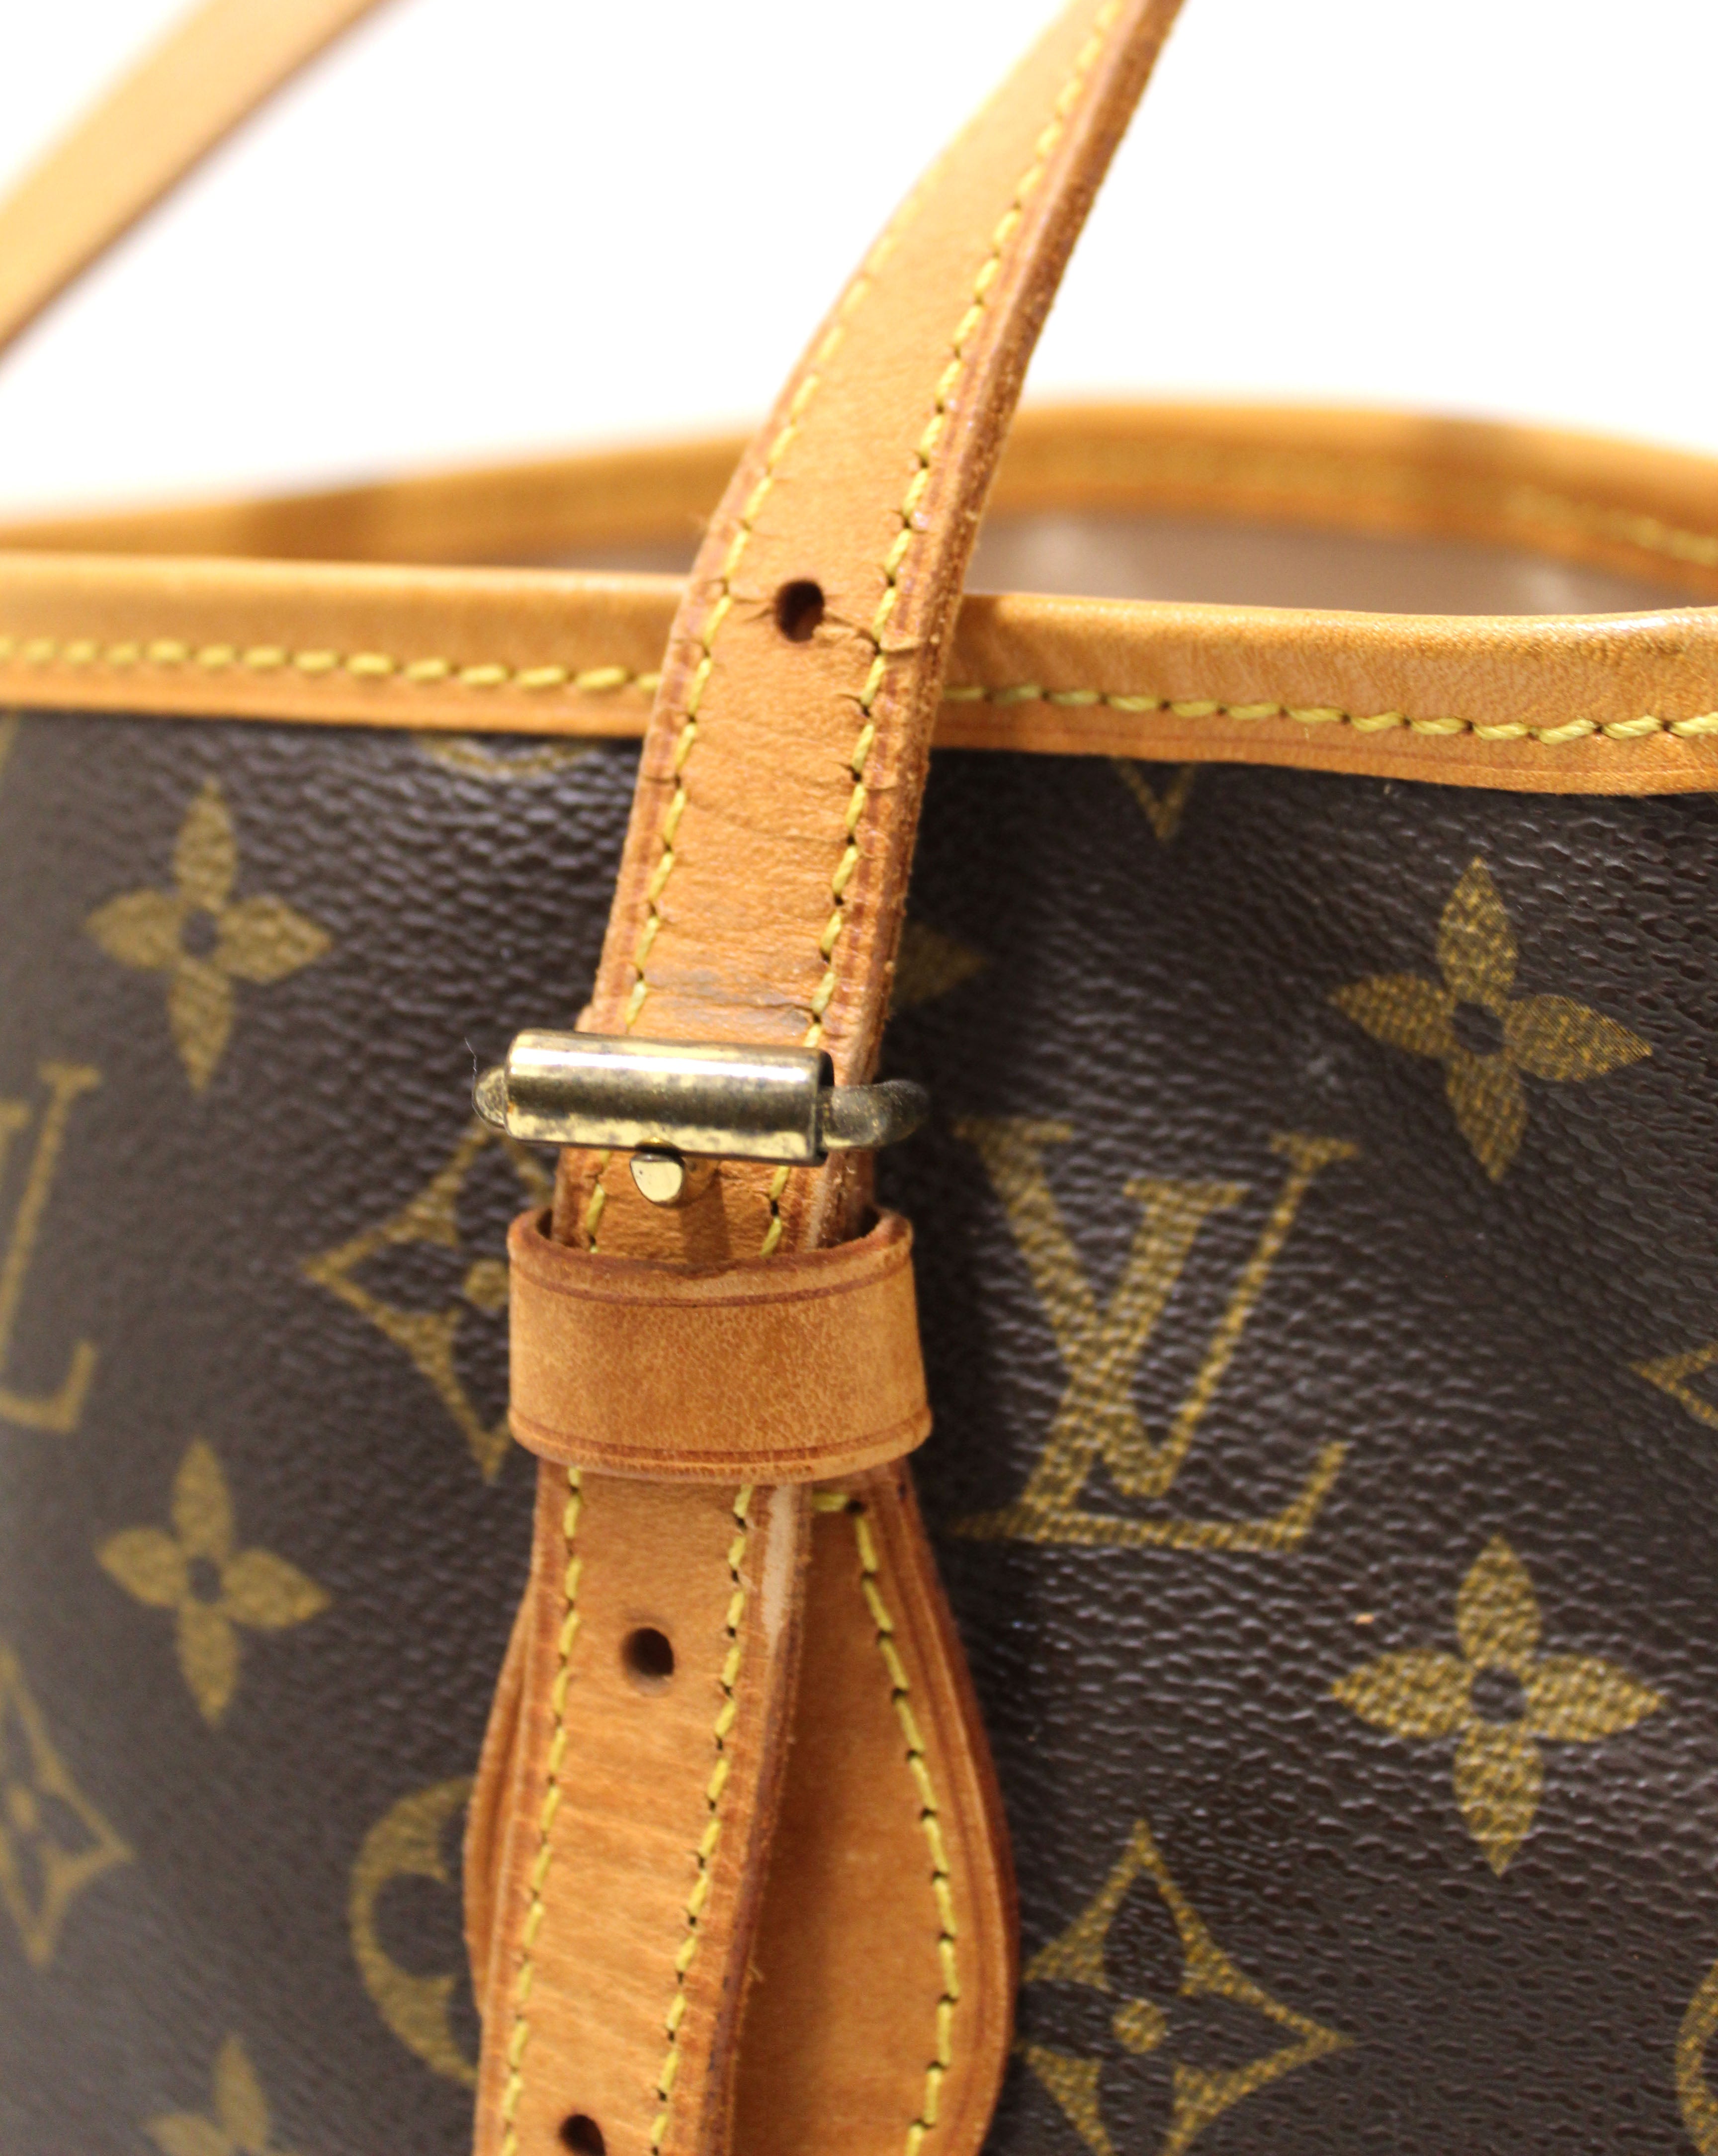 Louis-Vuitton Bucket Bag pm with Zipper Pouch and Dust Bag Leather Monogram